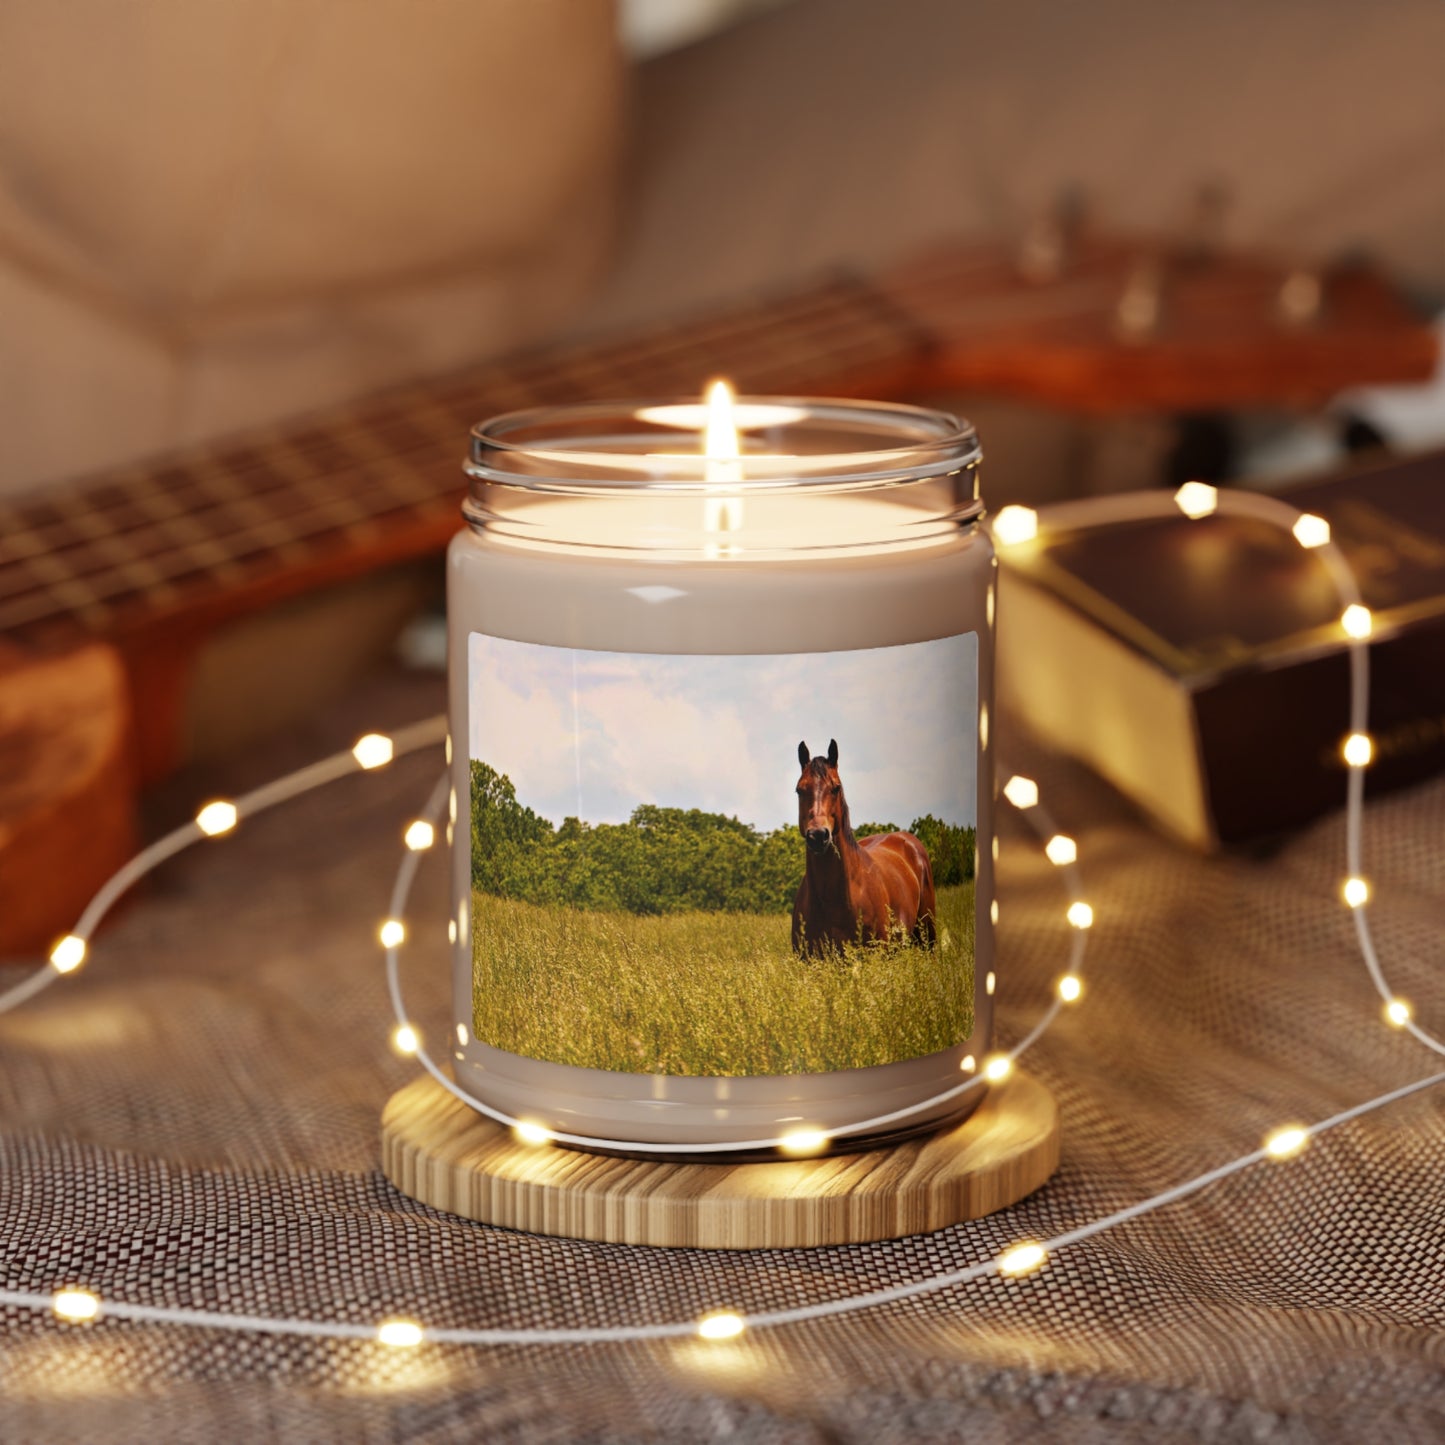 Western Cowboy Horse Photo Scented Soy Candle, 9oz